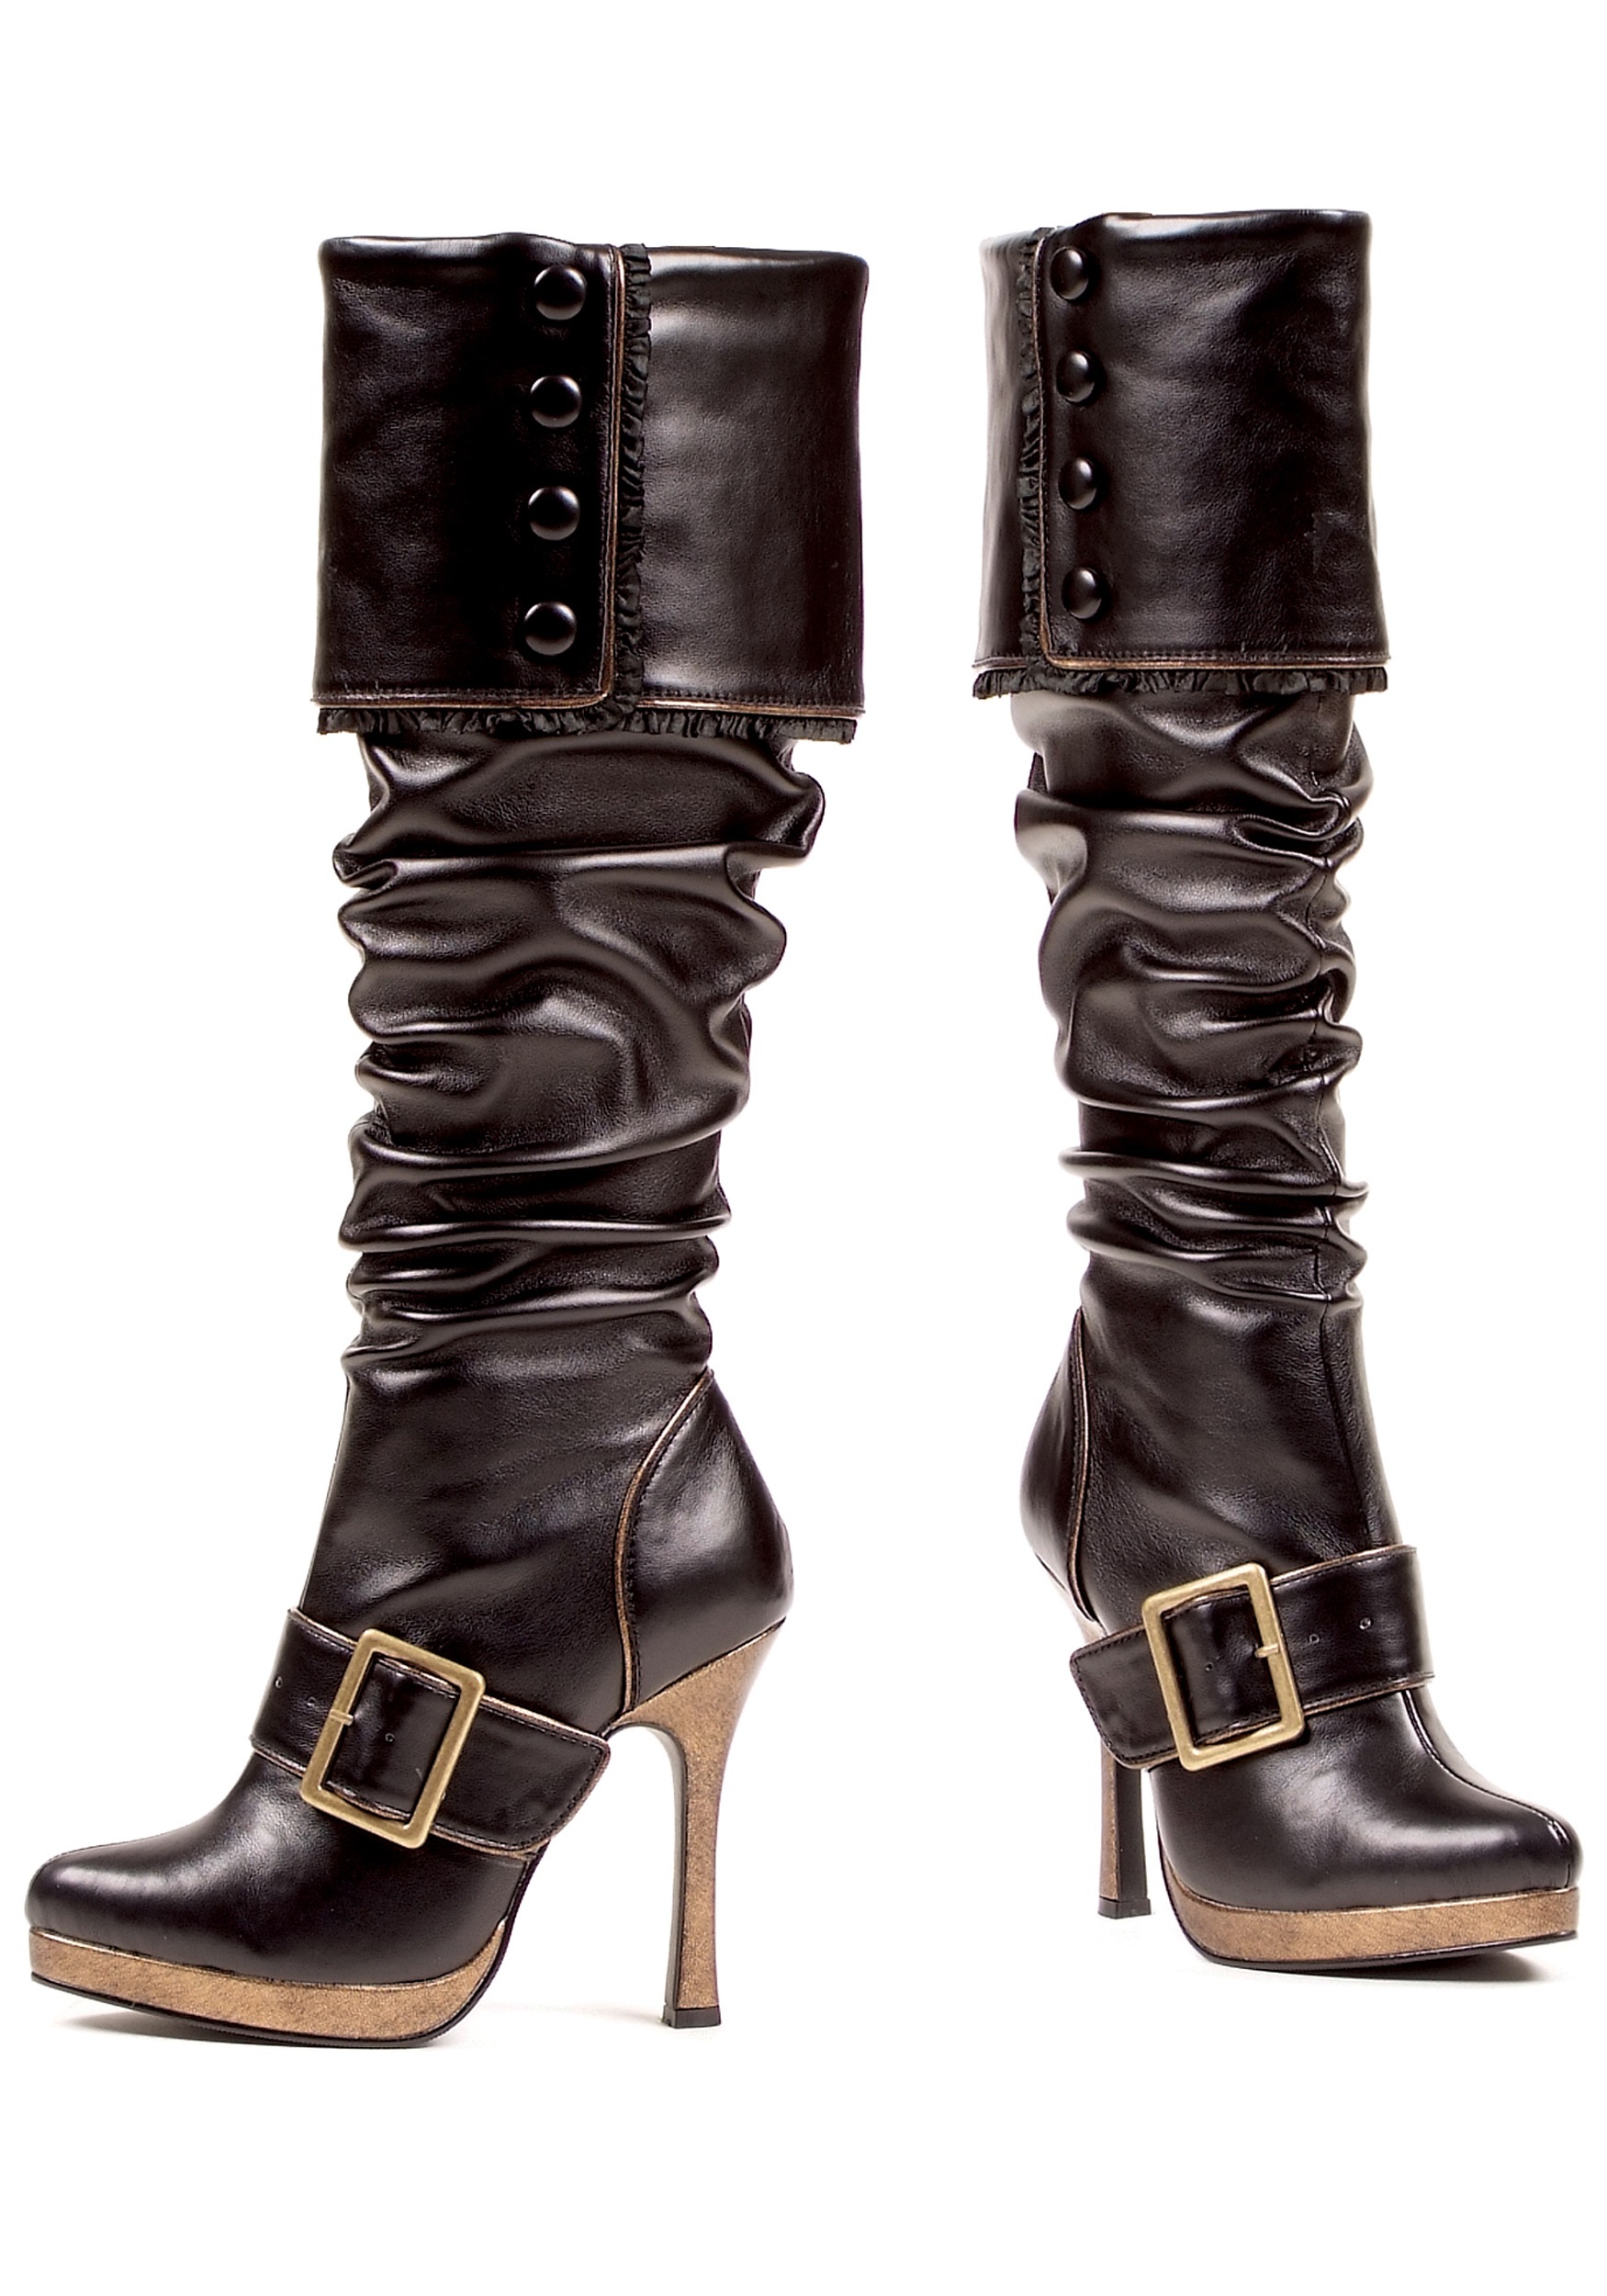 Women's Sexy Buckle Pirate Fancy Dress Costume Boots